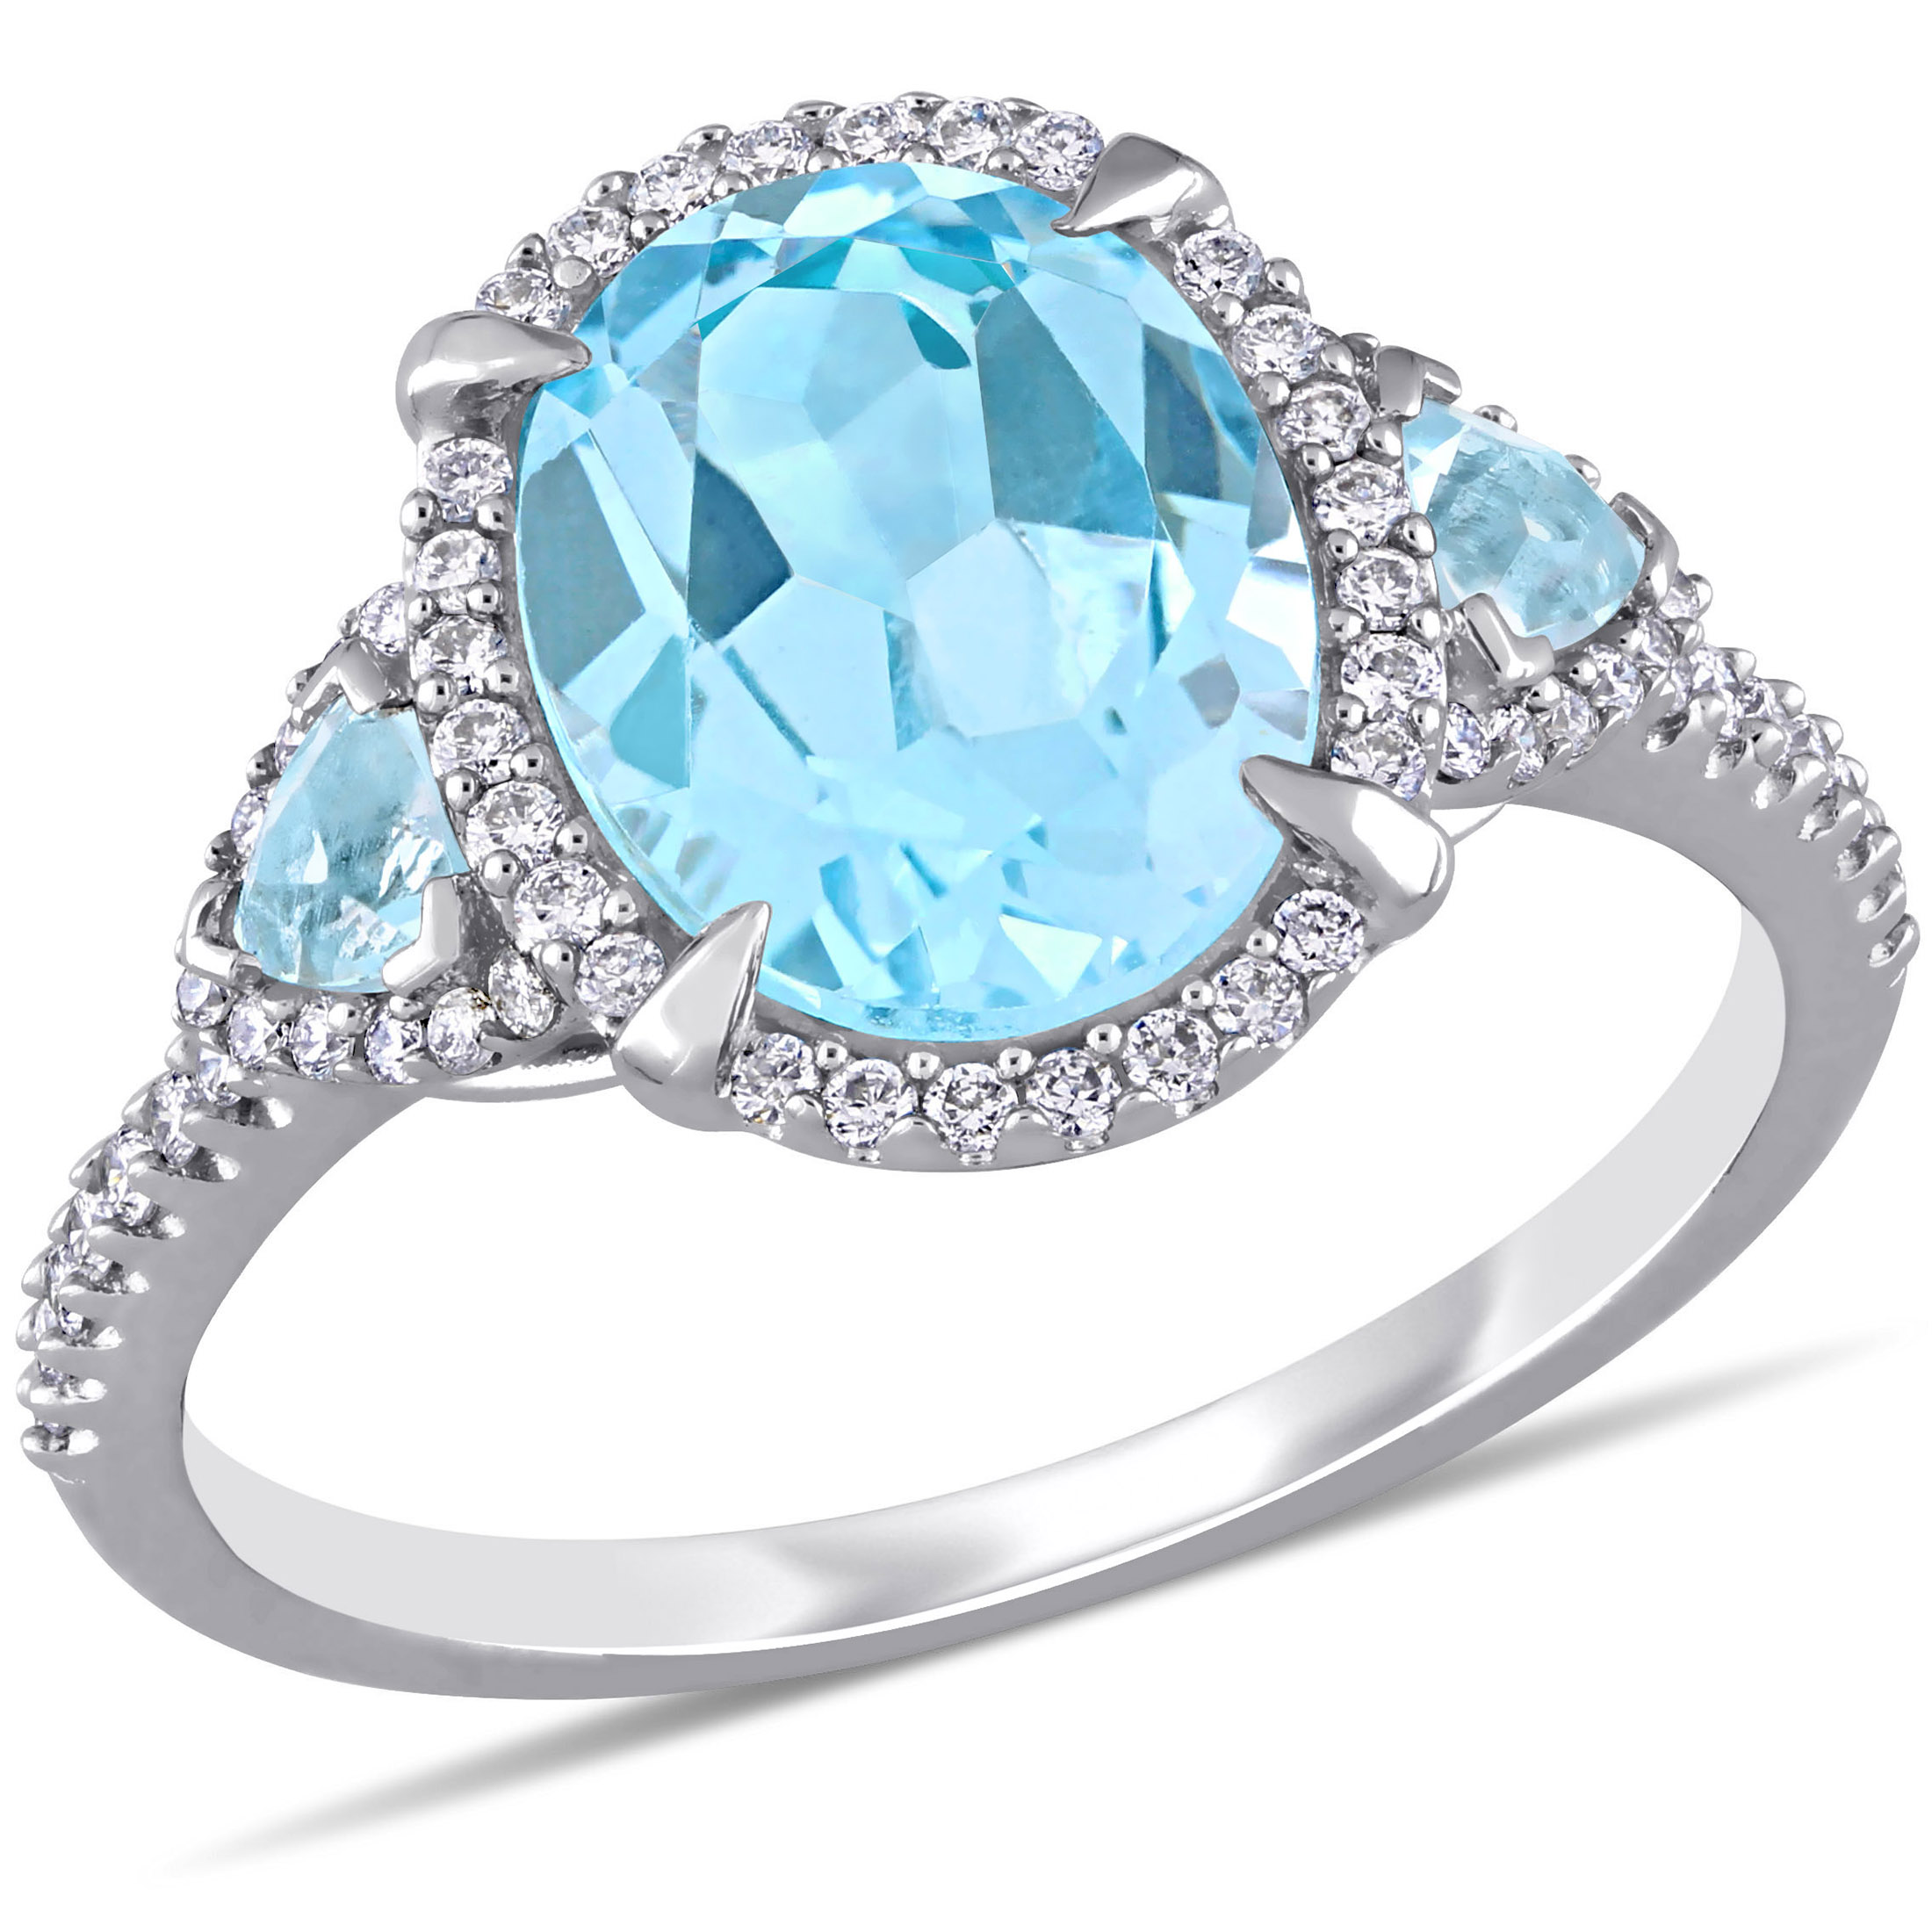 Miabella Women's 4 Carat T.G.W. Oval-Cut and Trilliant-Cut Sky Blue Topaz and 1/4 Carat T.W. Round-Cut Diamond 14kt White Gold Halo Ring - image 1 of 8